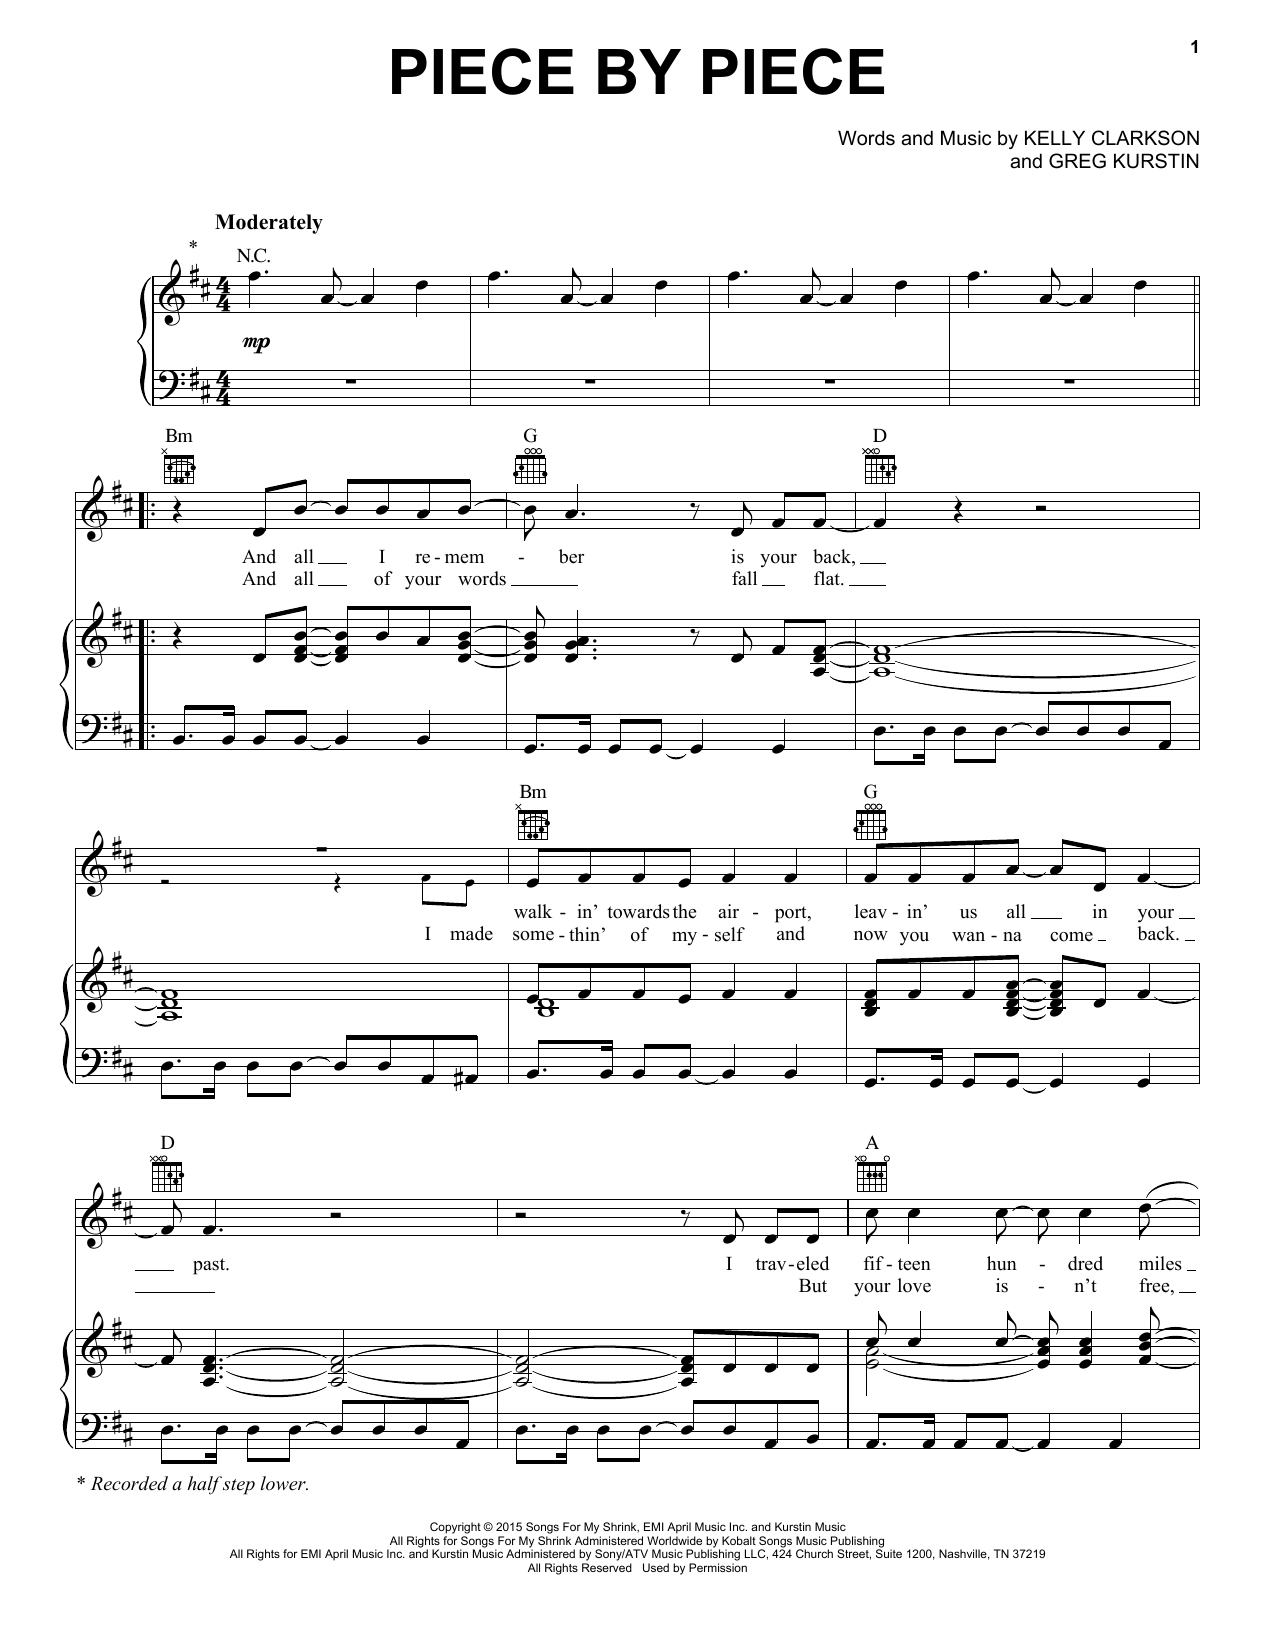 Download Kelly Clarkson Piece By Piece Sheet Music